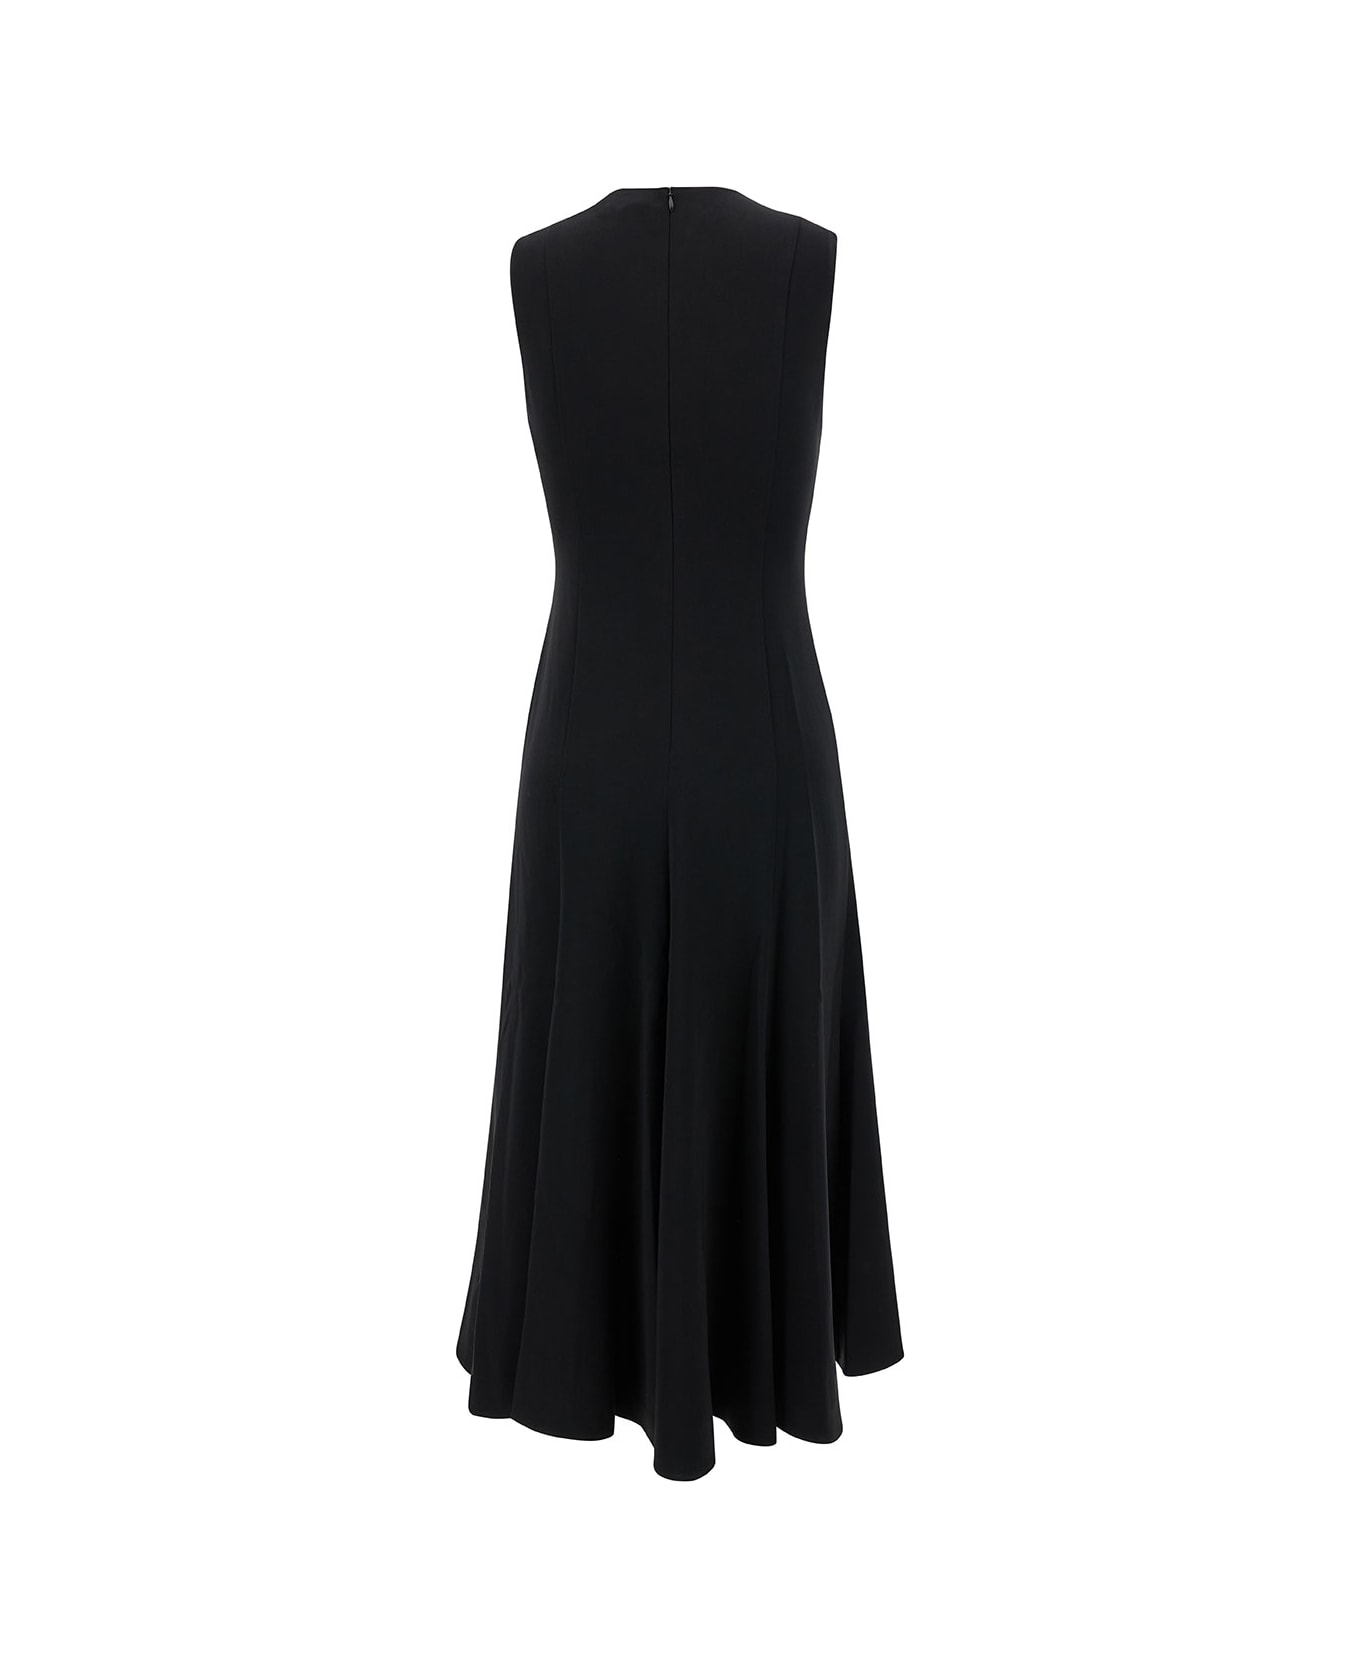 Theory Midi Black Sleeveless Dress With Pleated Skirt In Triacetate Blend Woman - Black